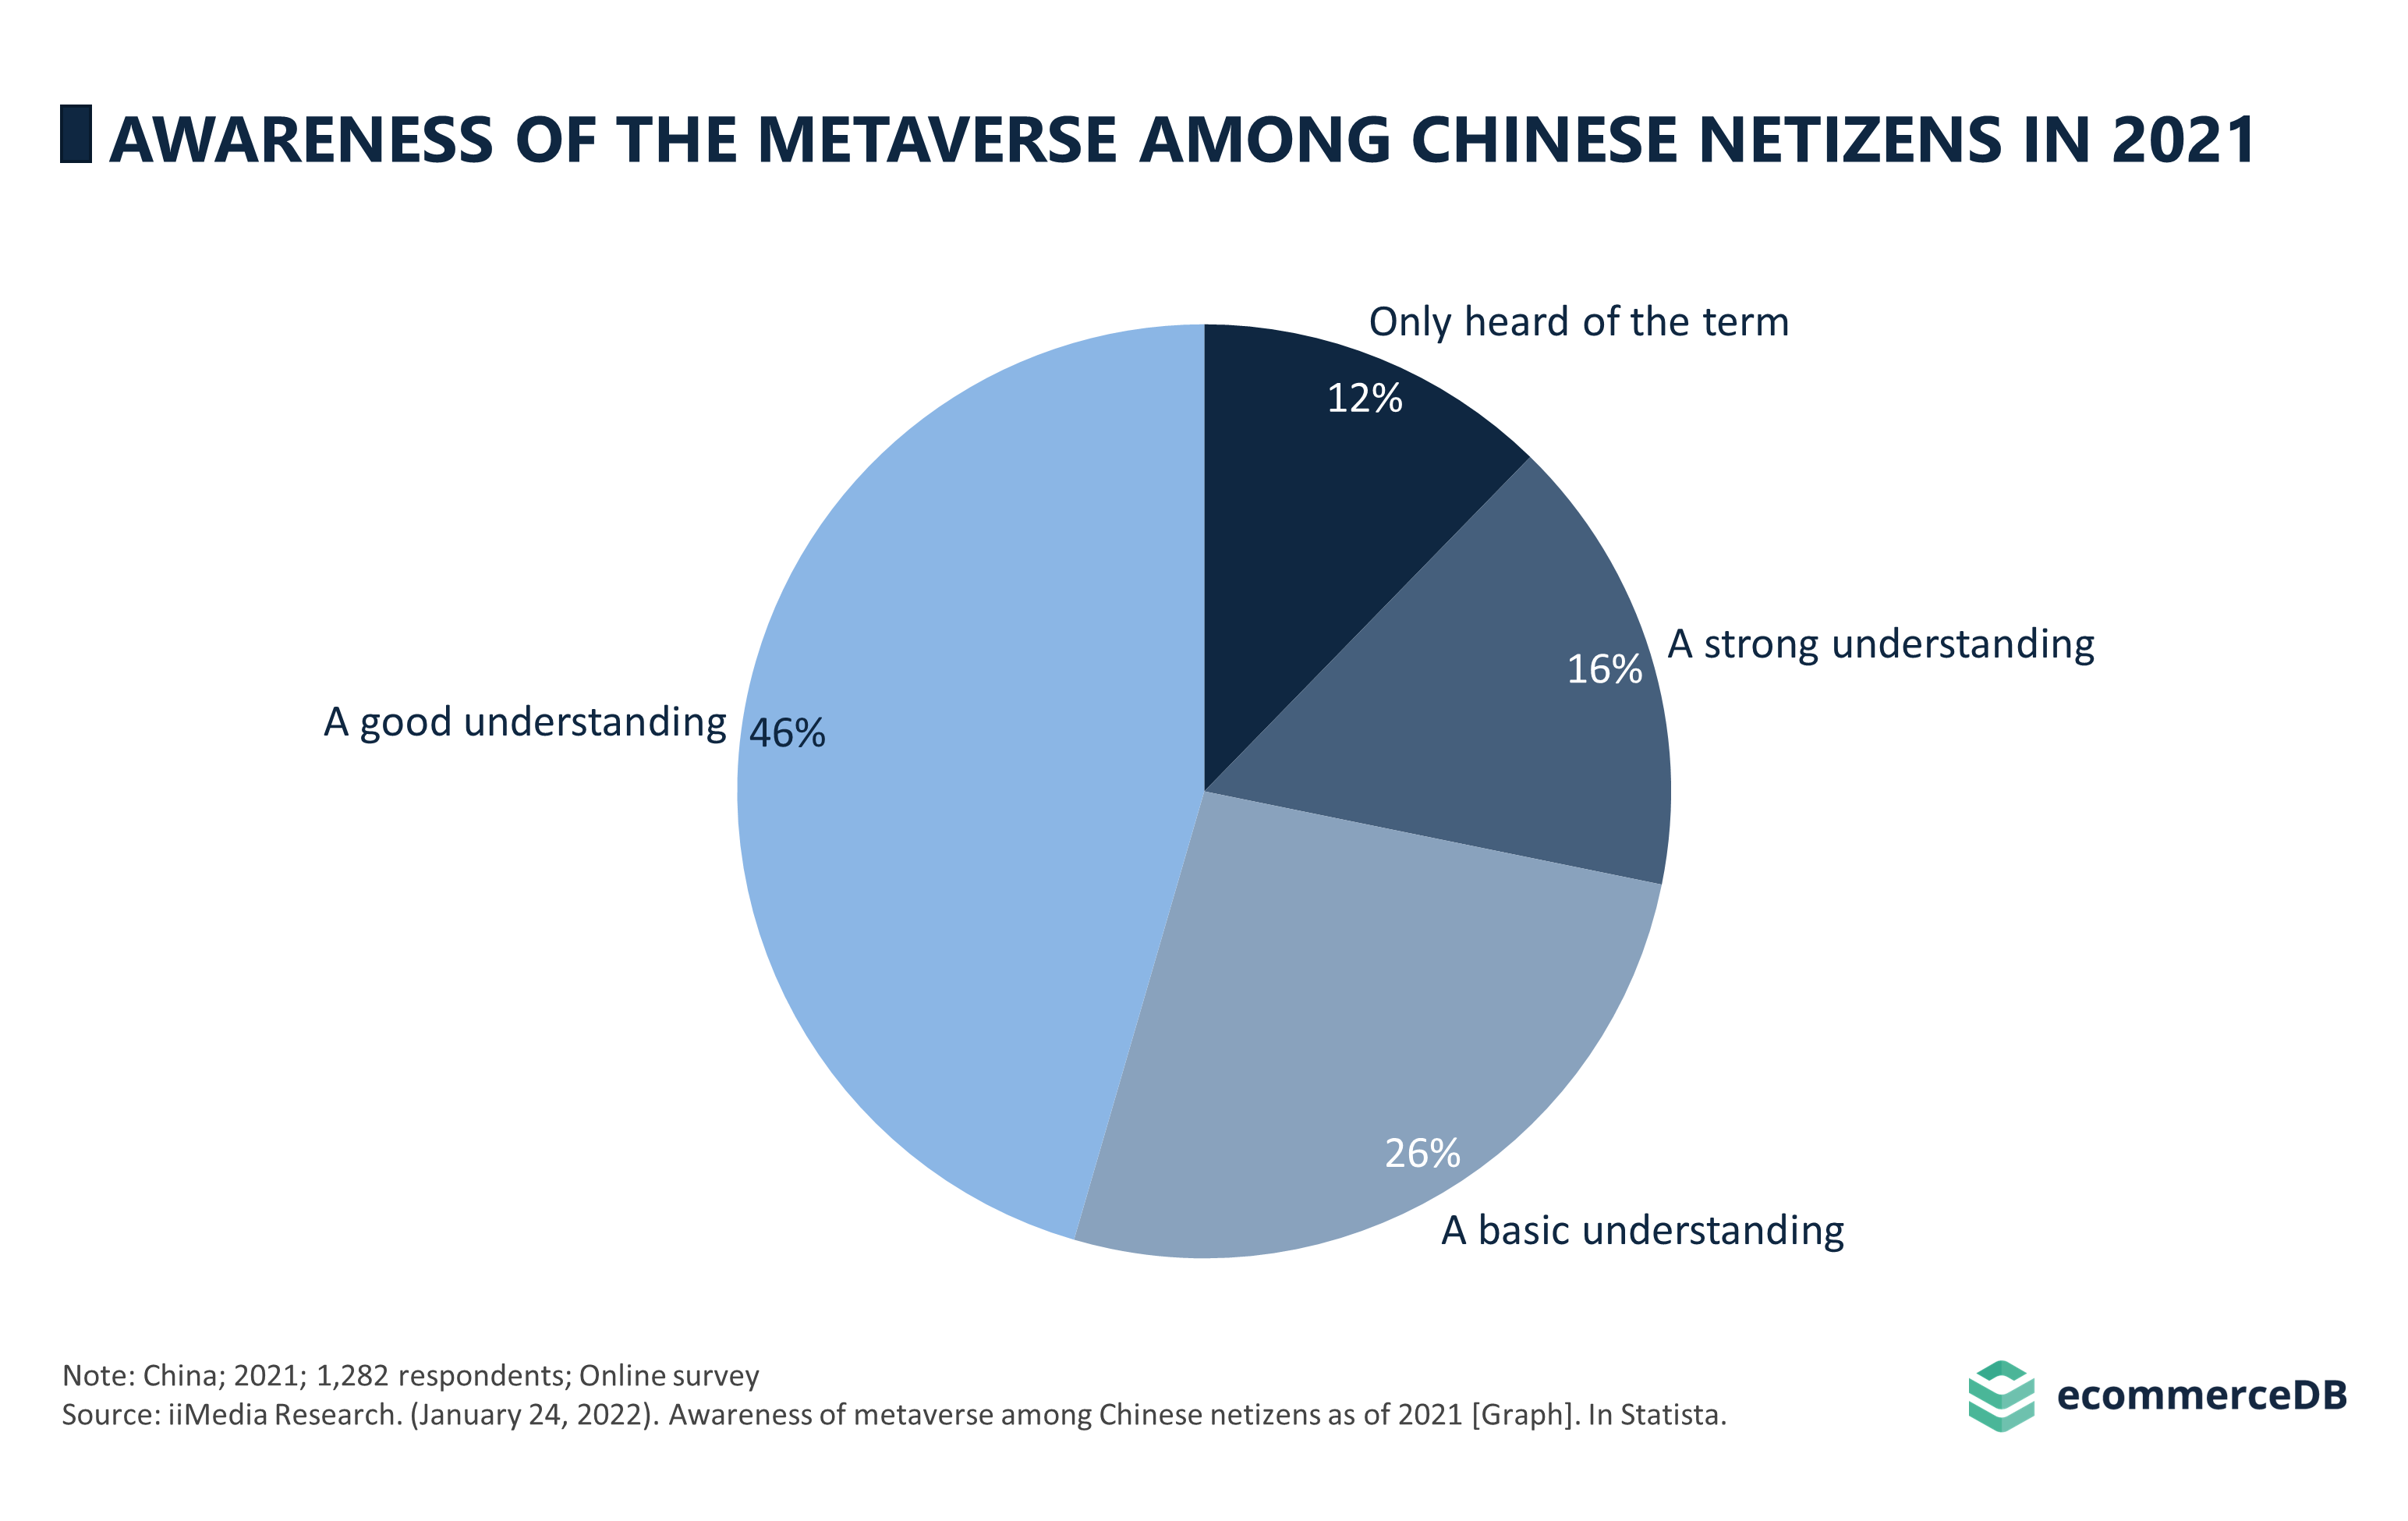 Awareness of the Metaverse Among Chinese Netizens in 2021